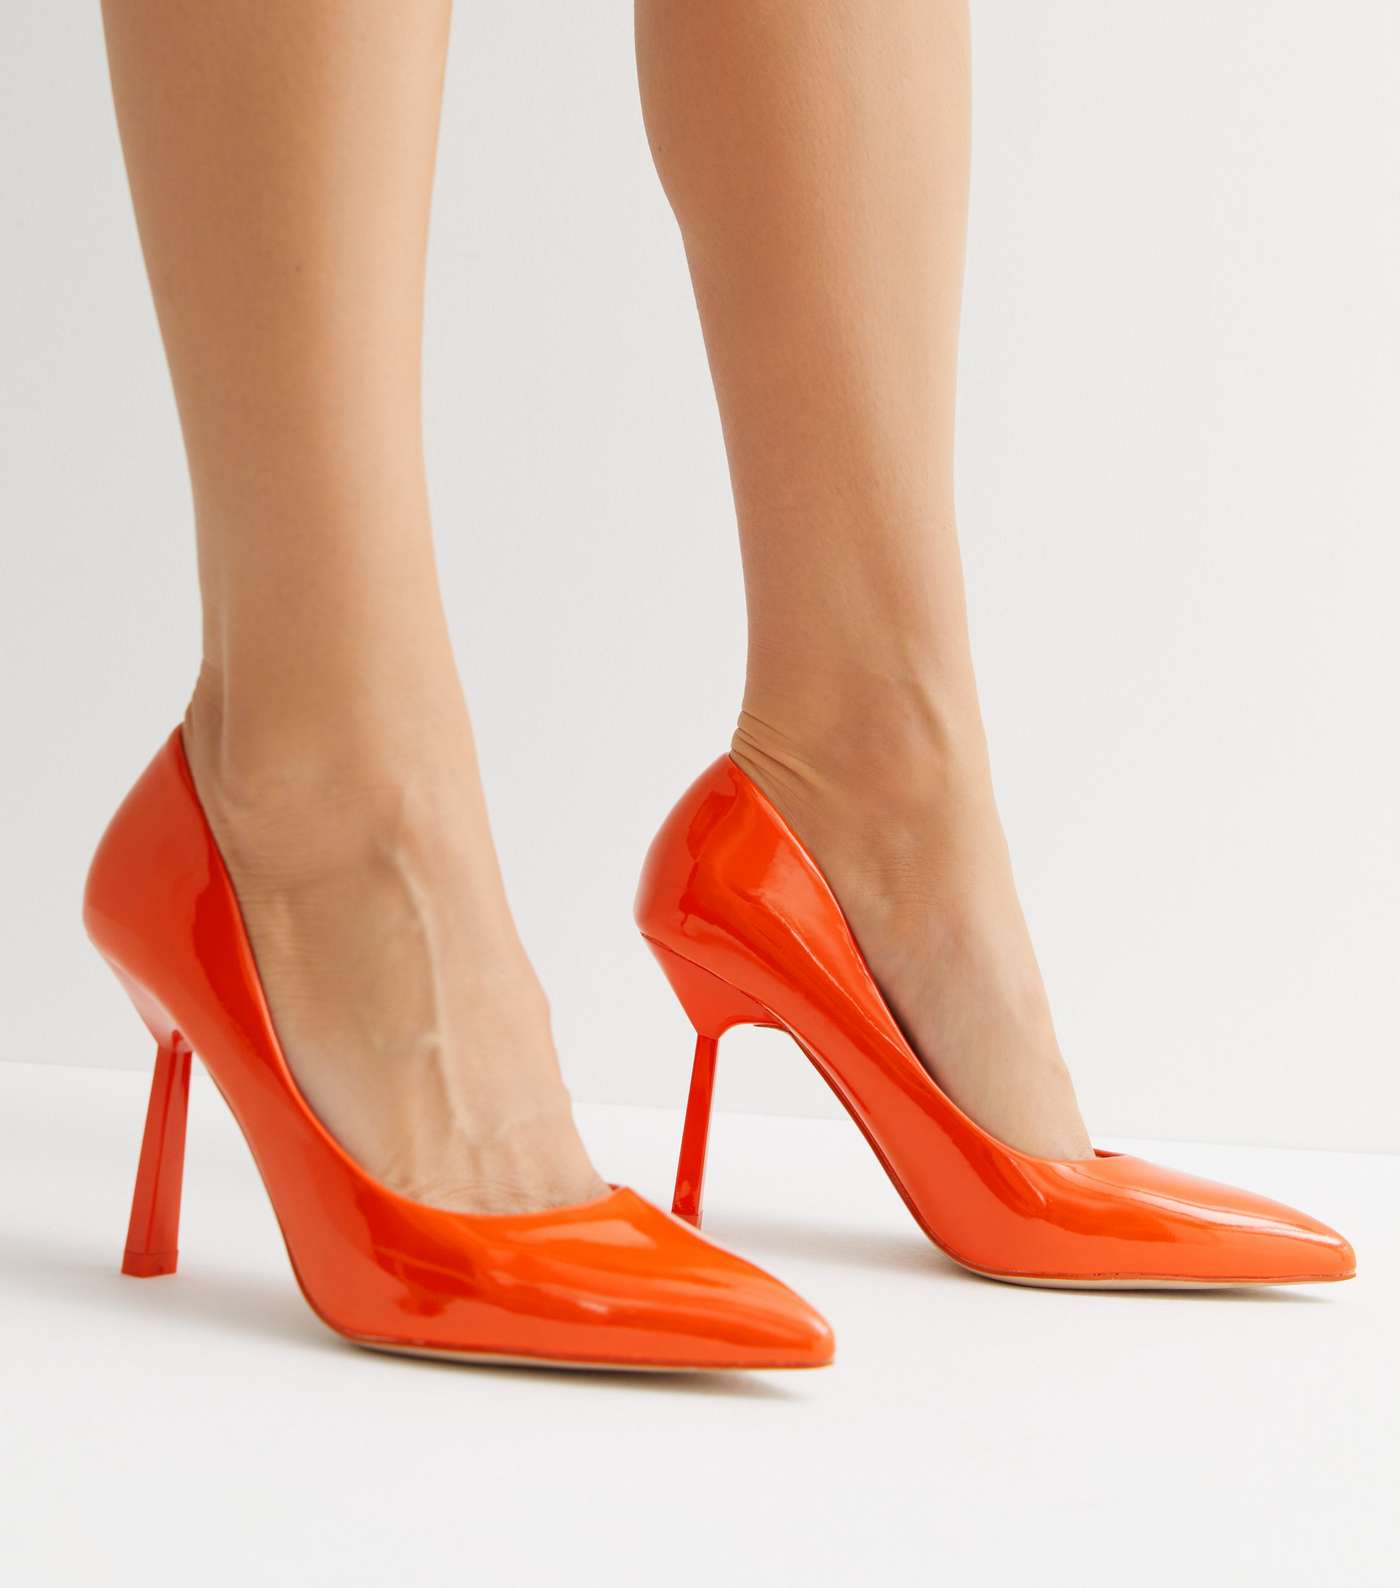 Orange Patent Faux Leather Pointed Toe Heels Image 2